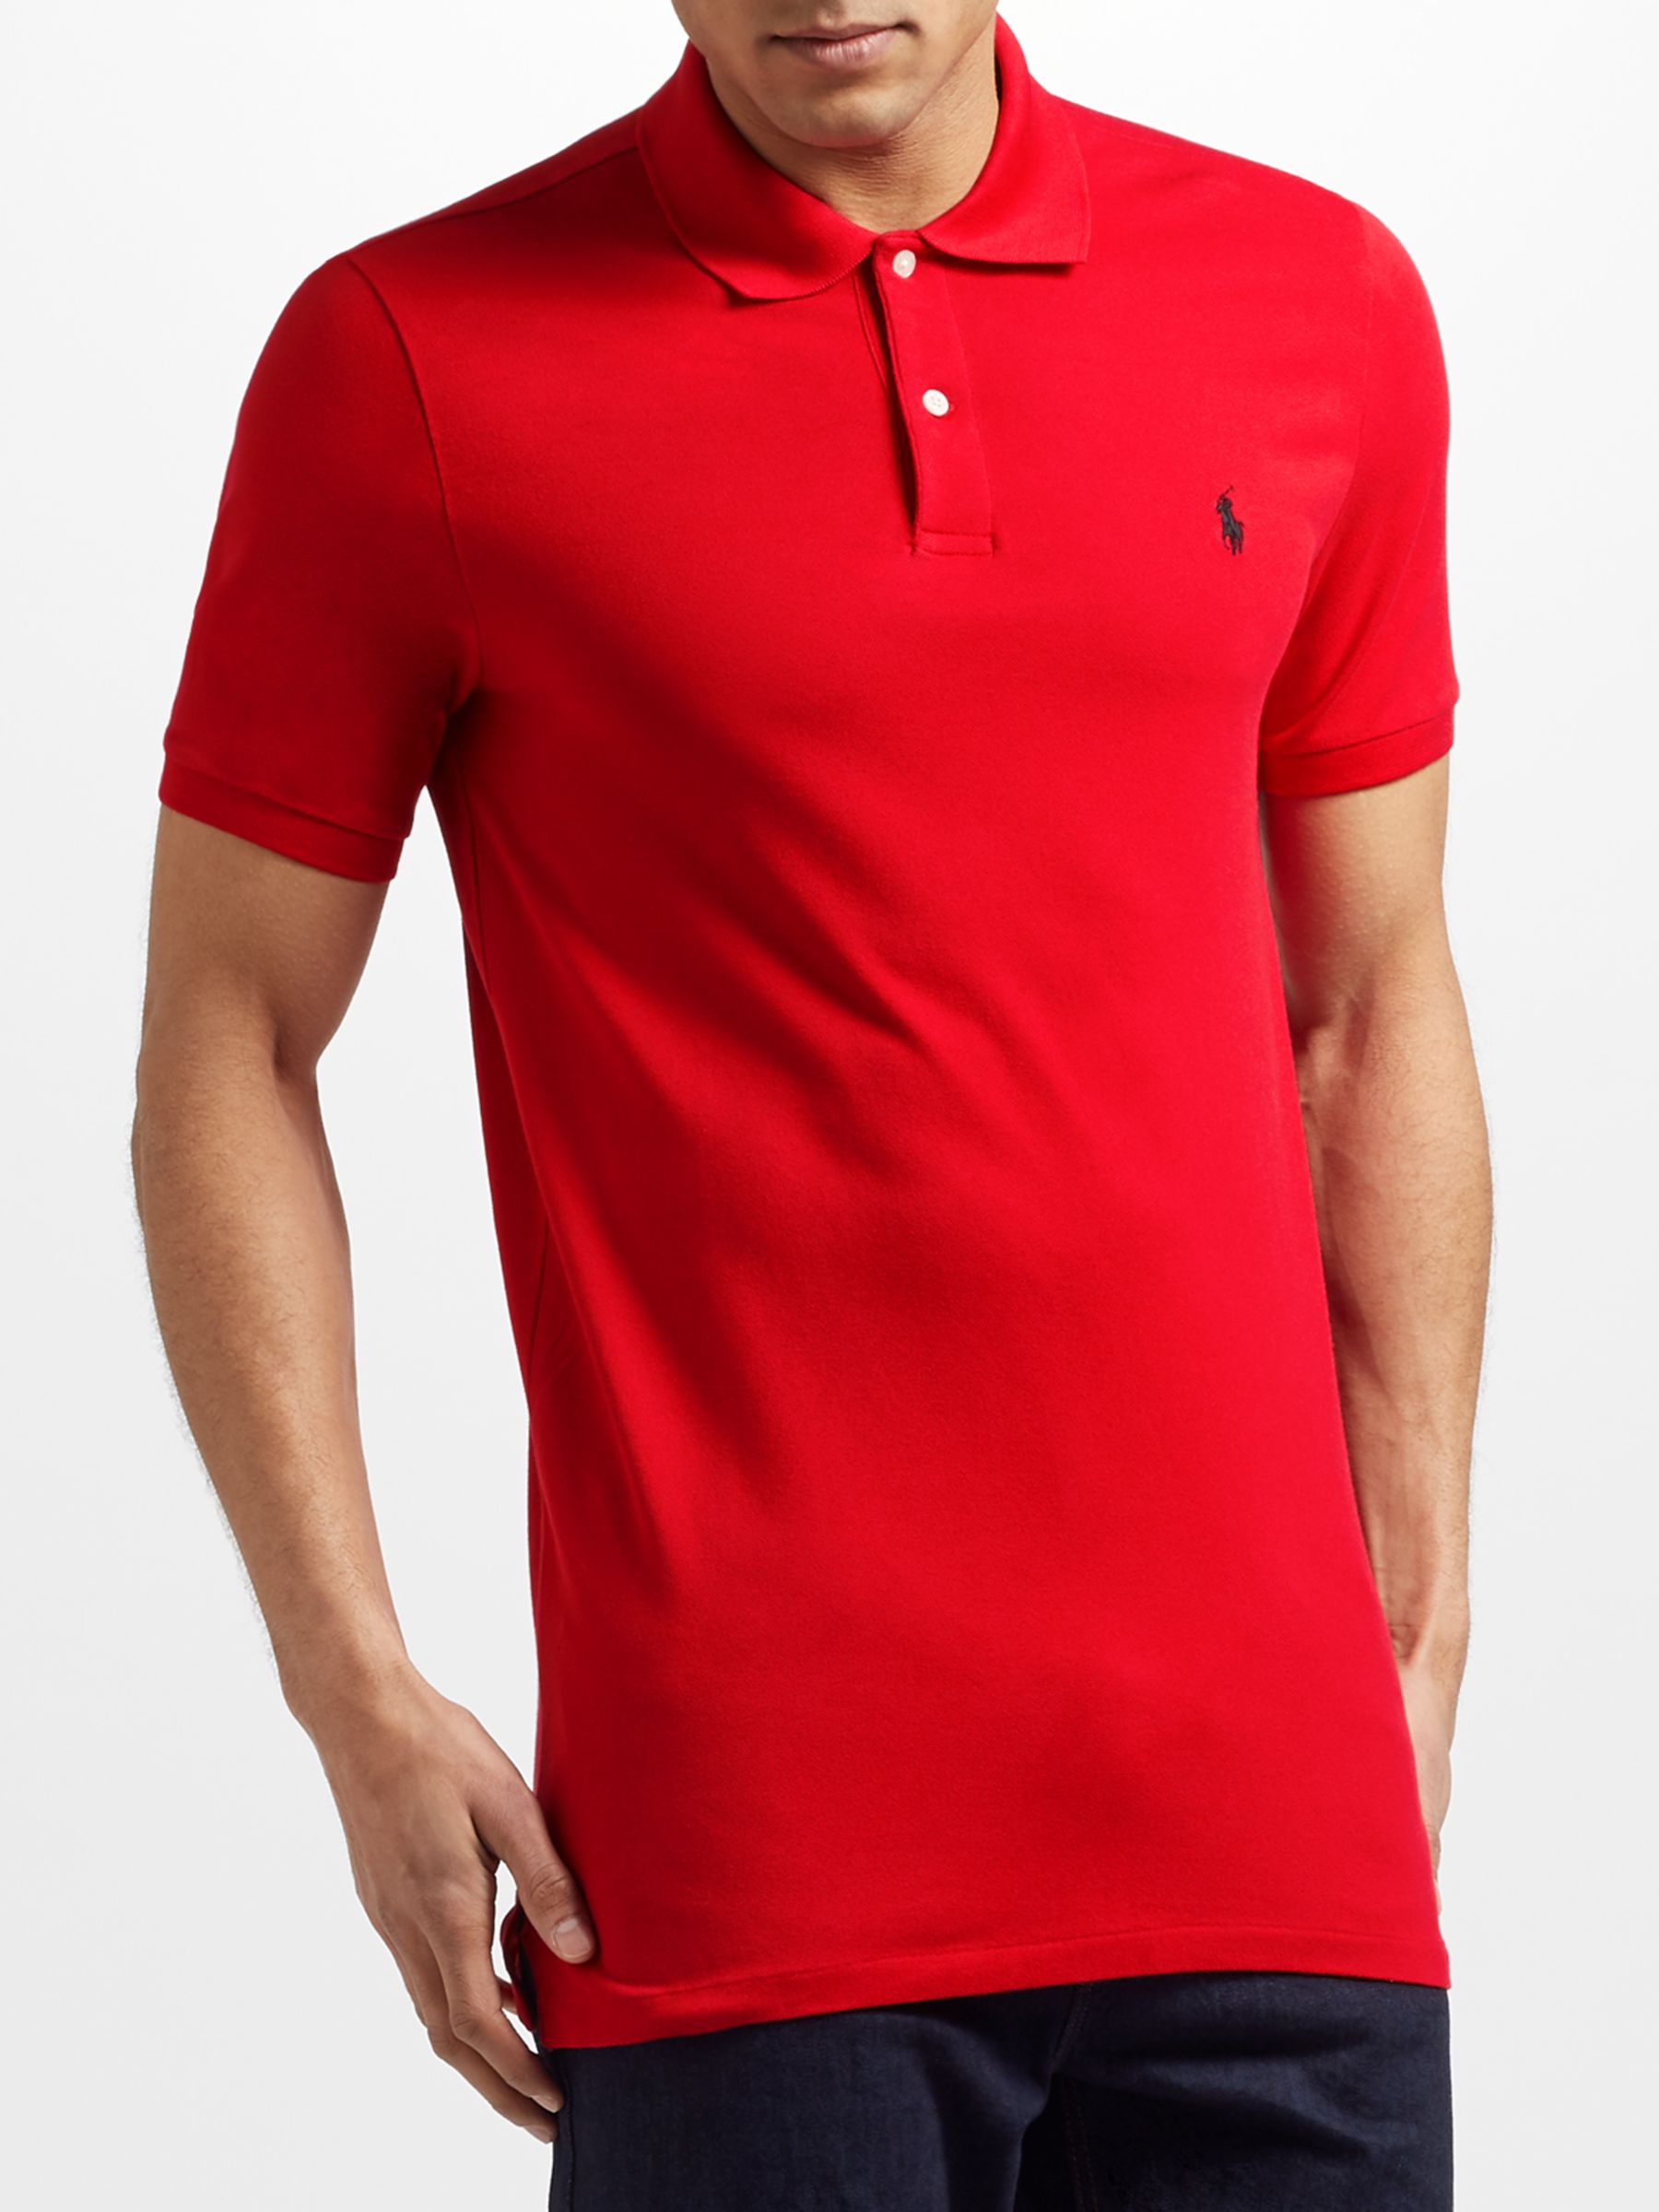 polo golf pro fit